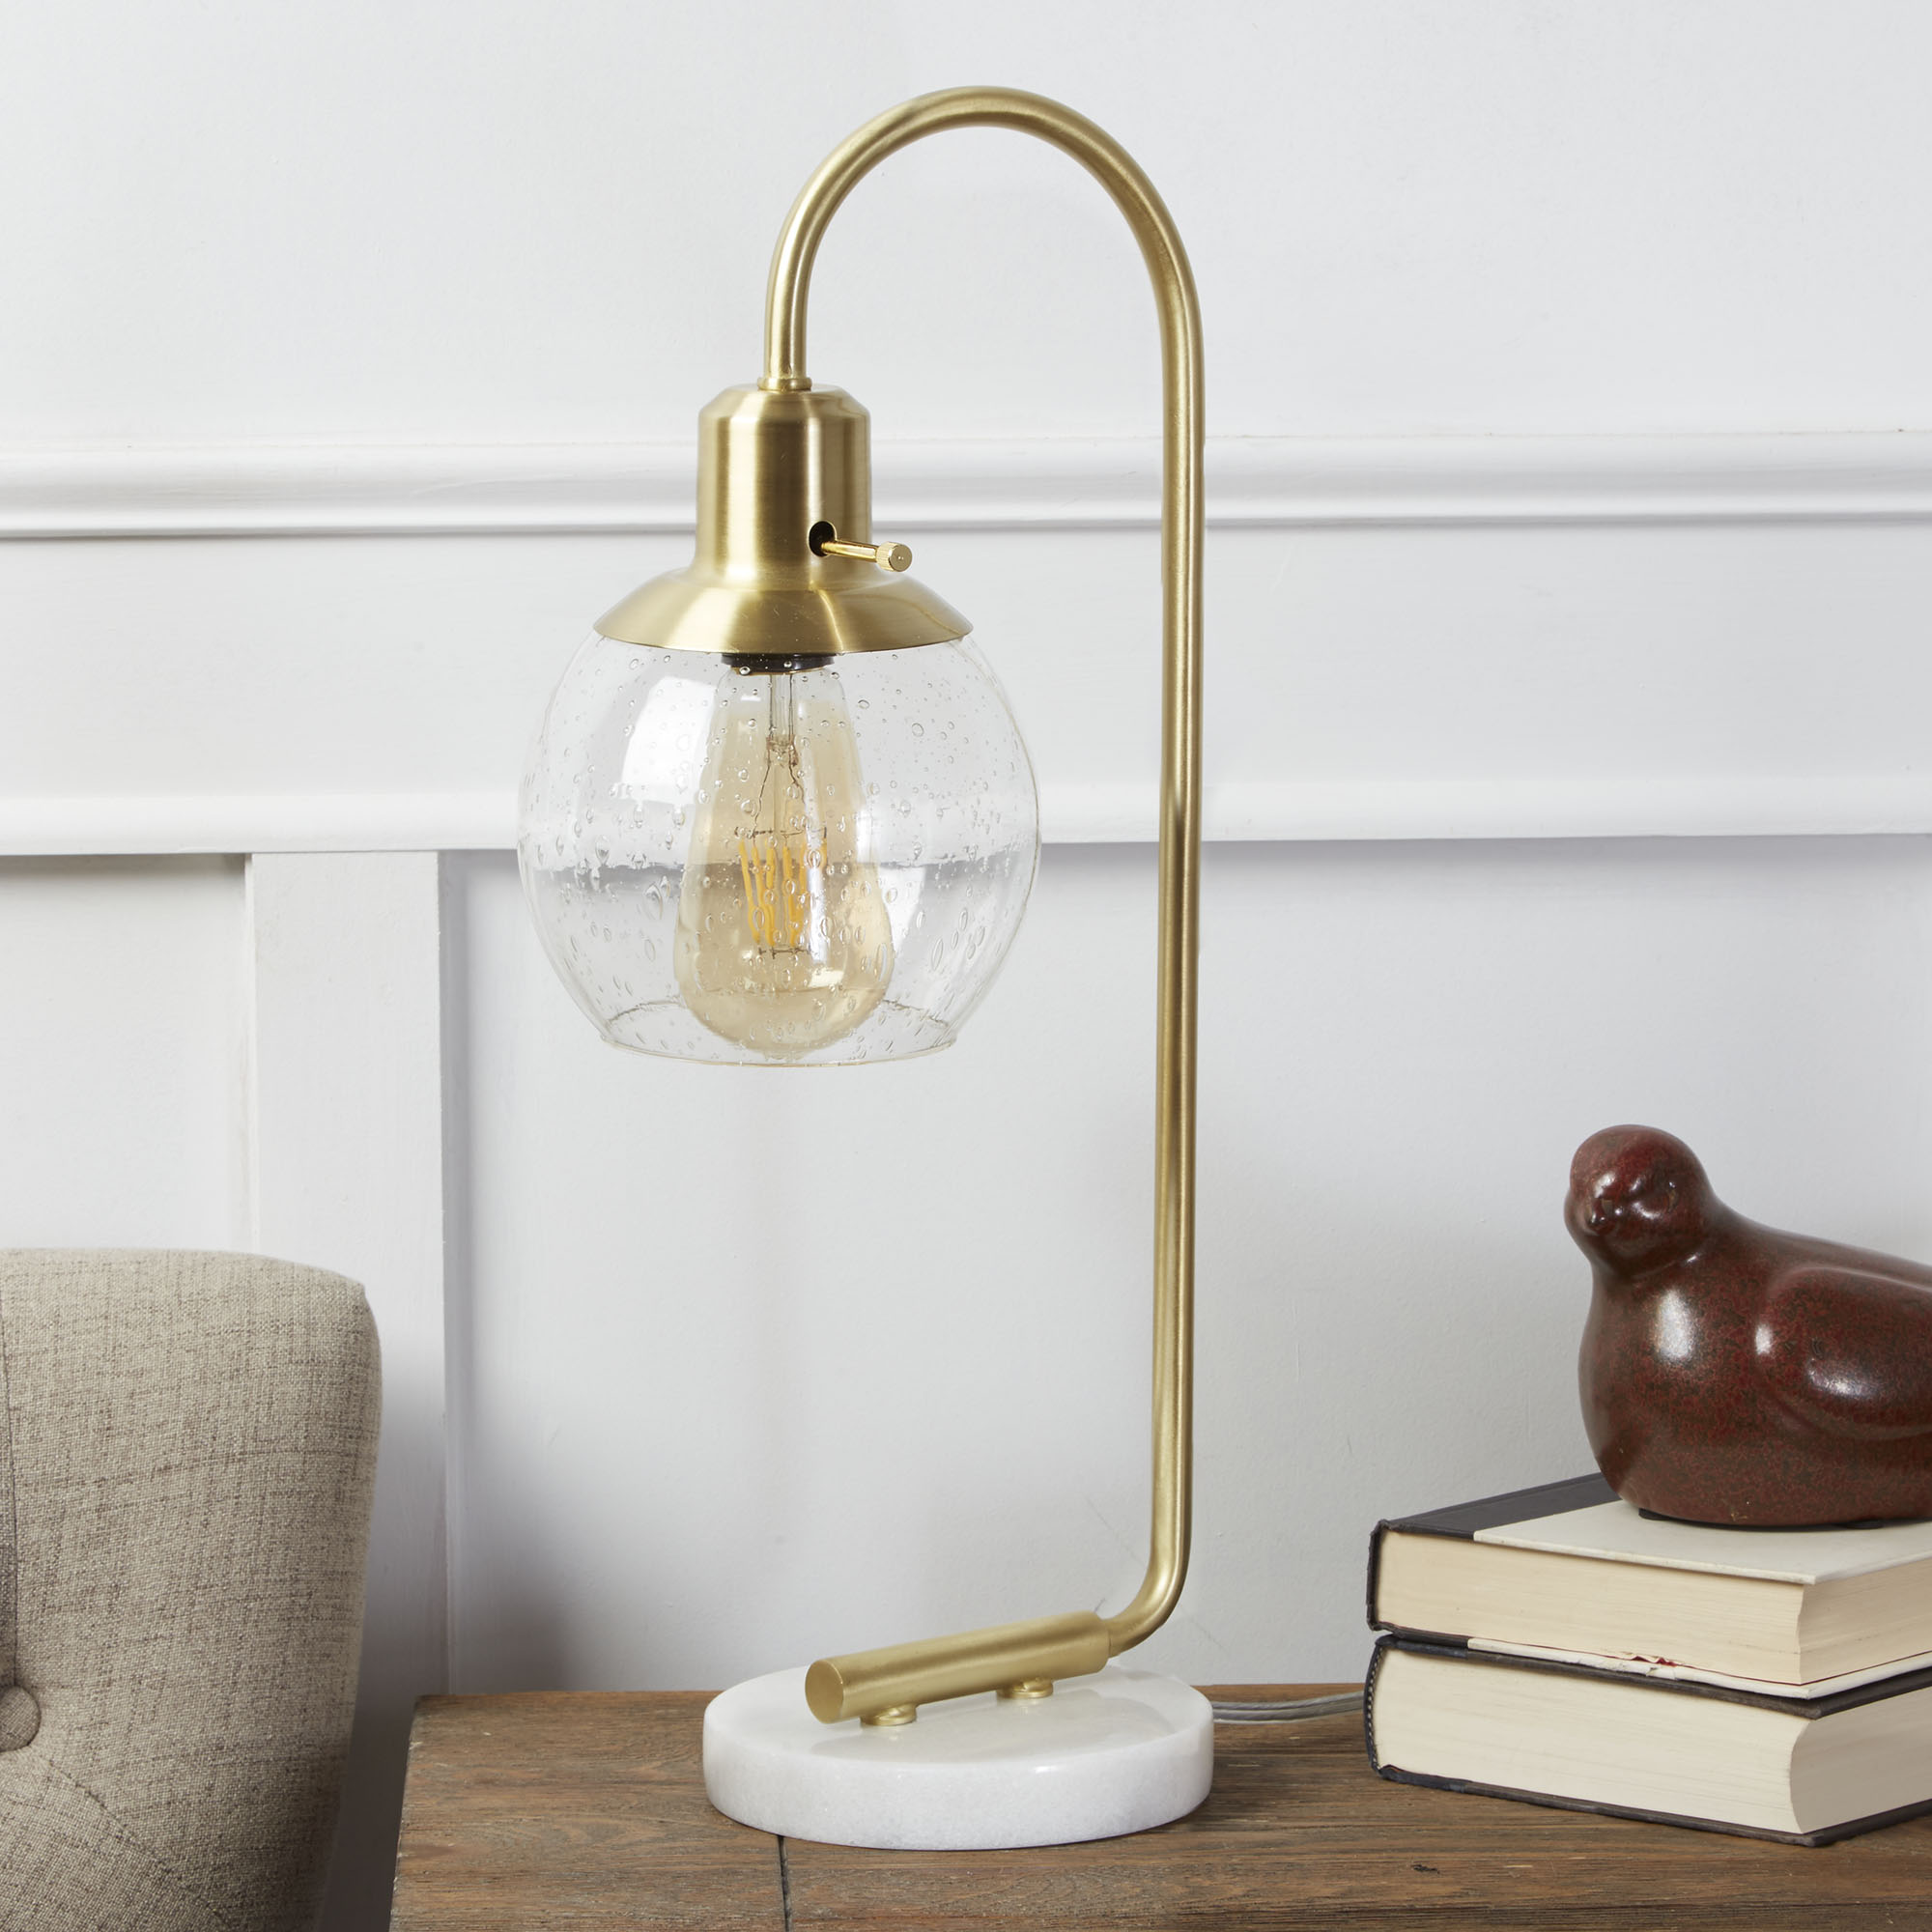 Better Homes & Gardens Real Marble Table Lamp, Brushed Brass Finish - image 3 of 5